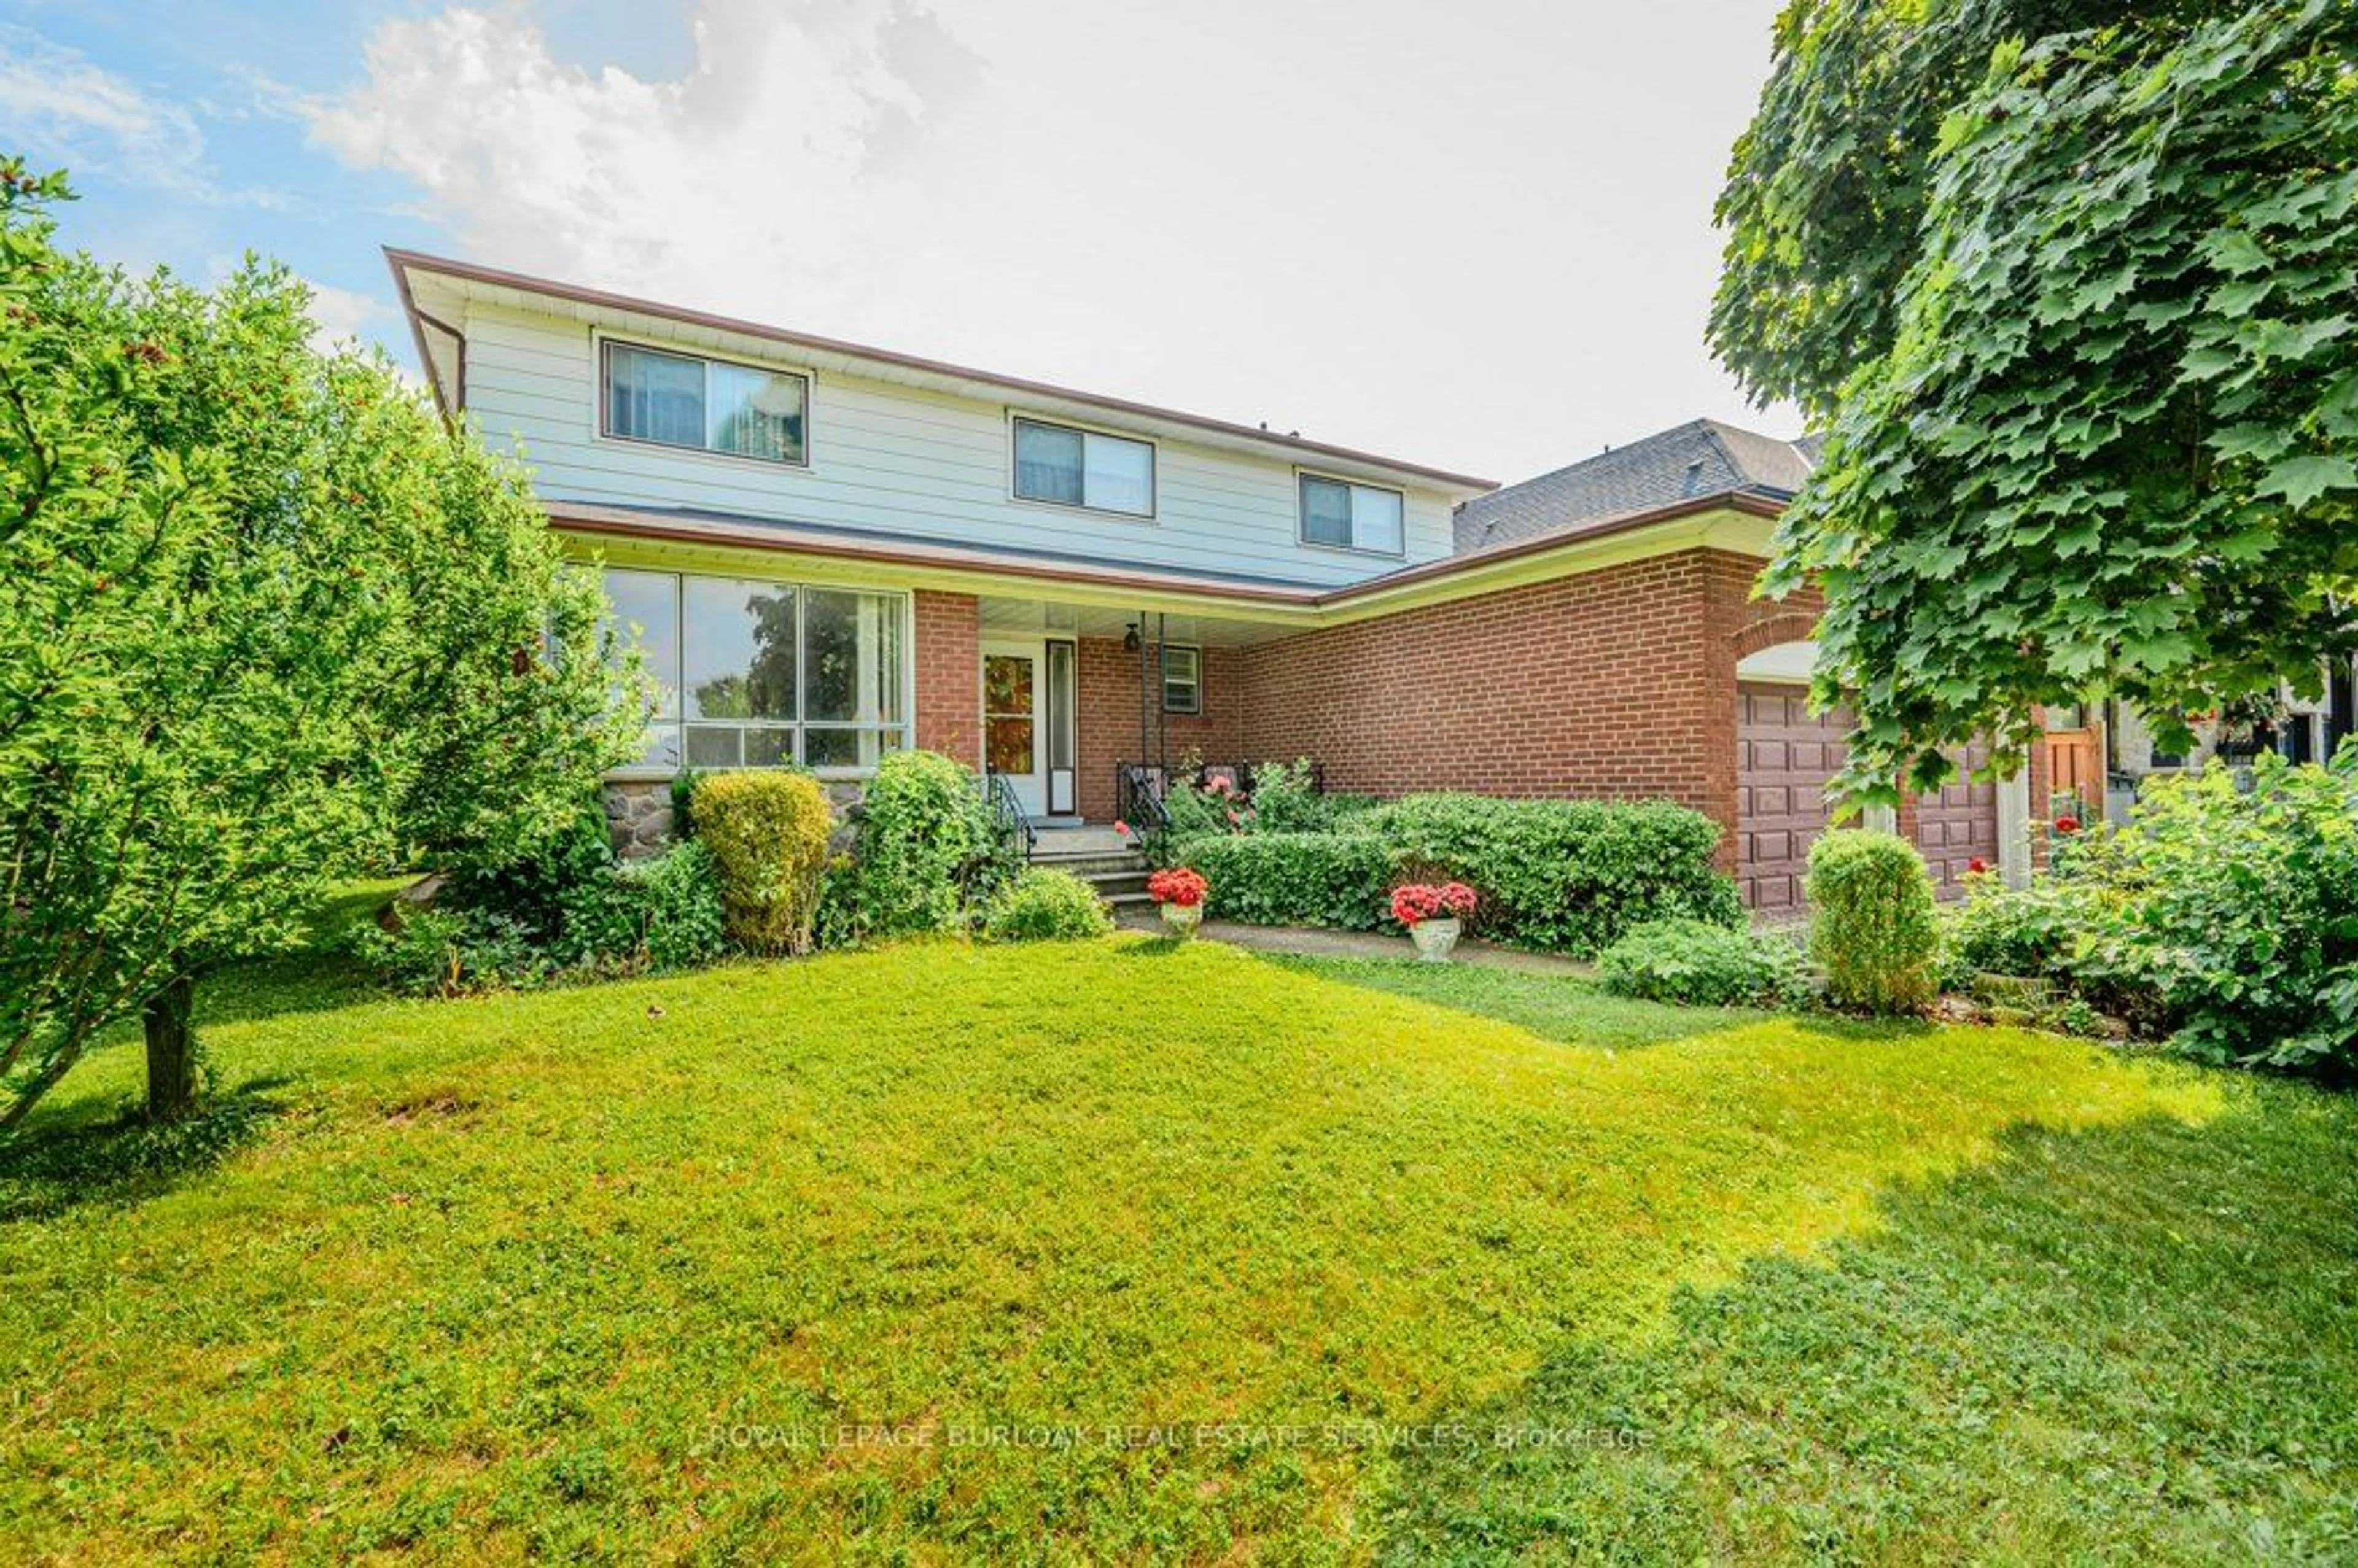 Home with brick exterior material for 339 Pinegrove Rd, Oakville Ontario L6K 3P8